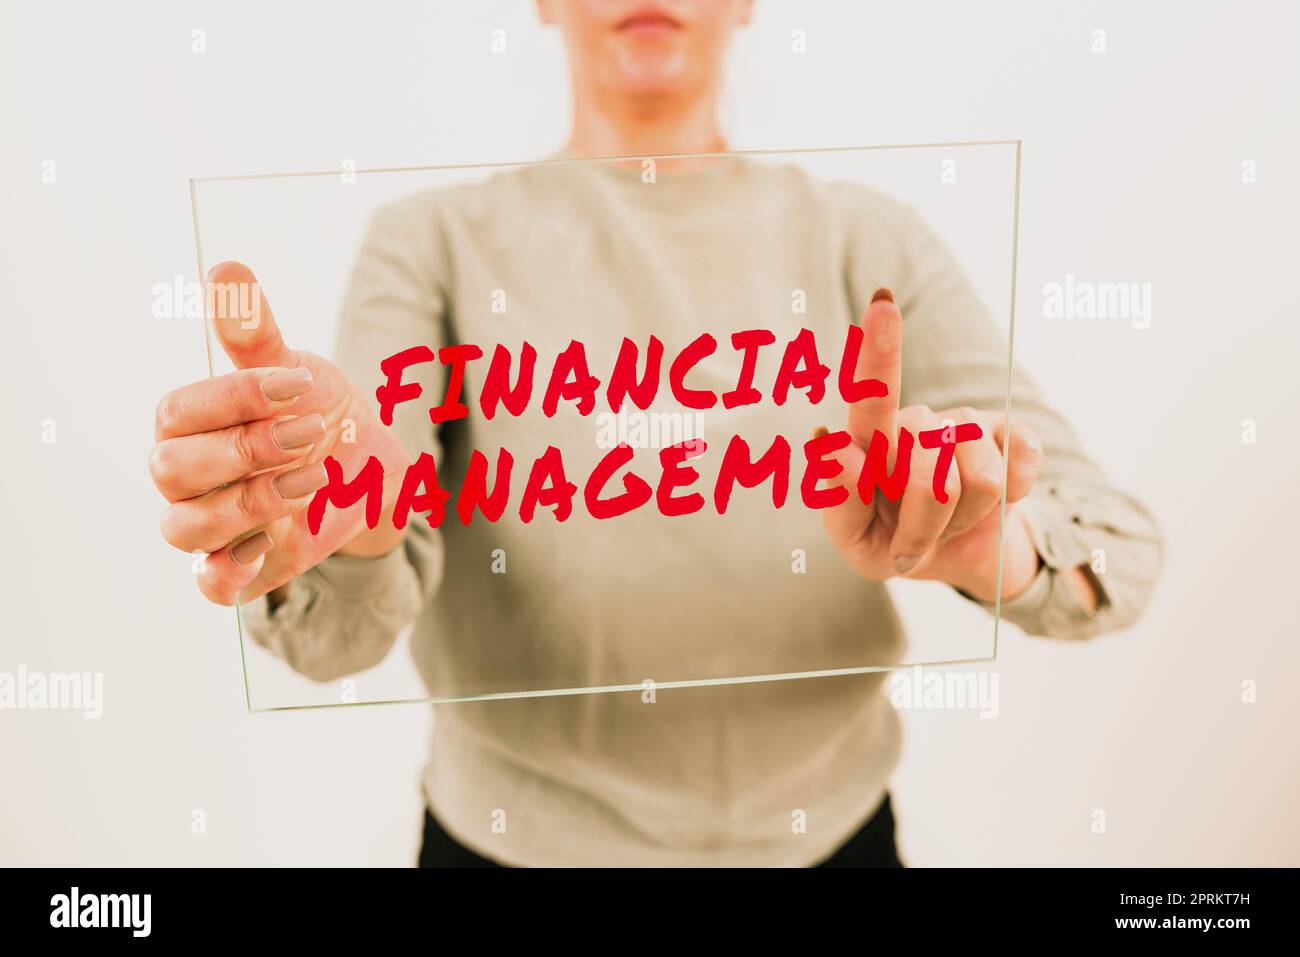 Text caption presenting Financial Management, Business idea efficient and effective way to Manage Money and Funds Stock Photo